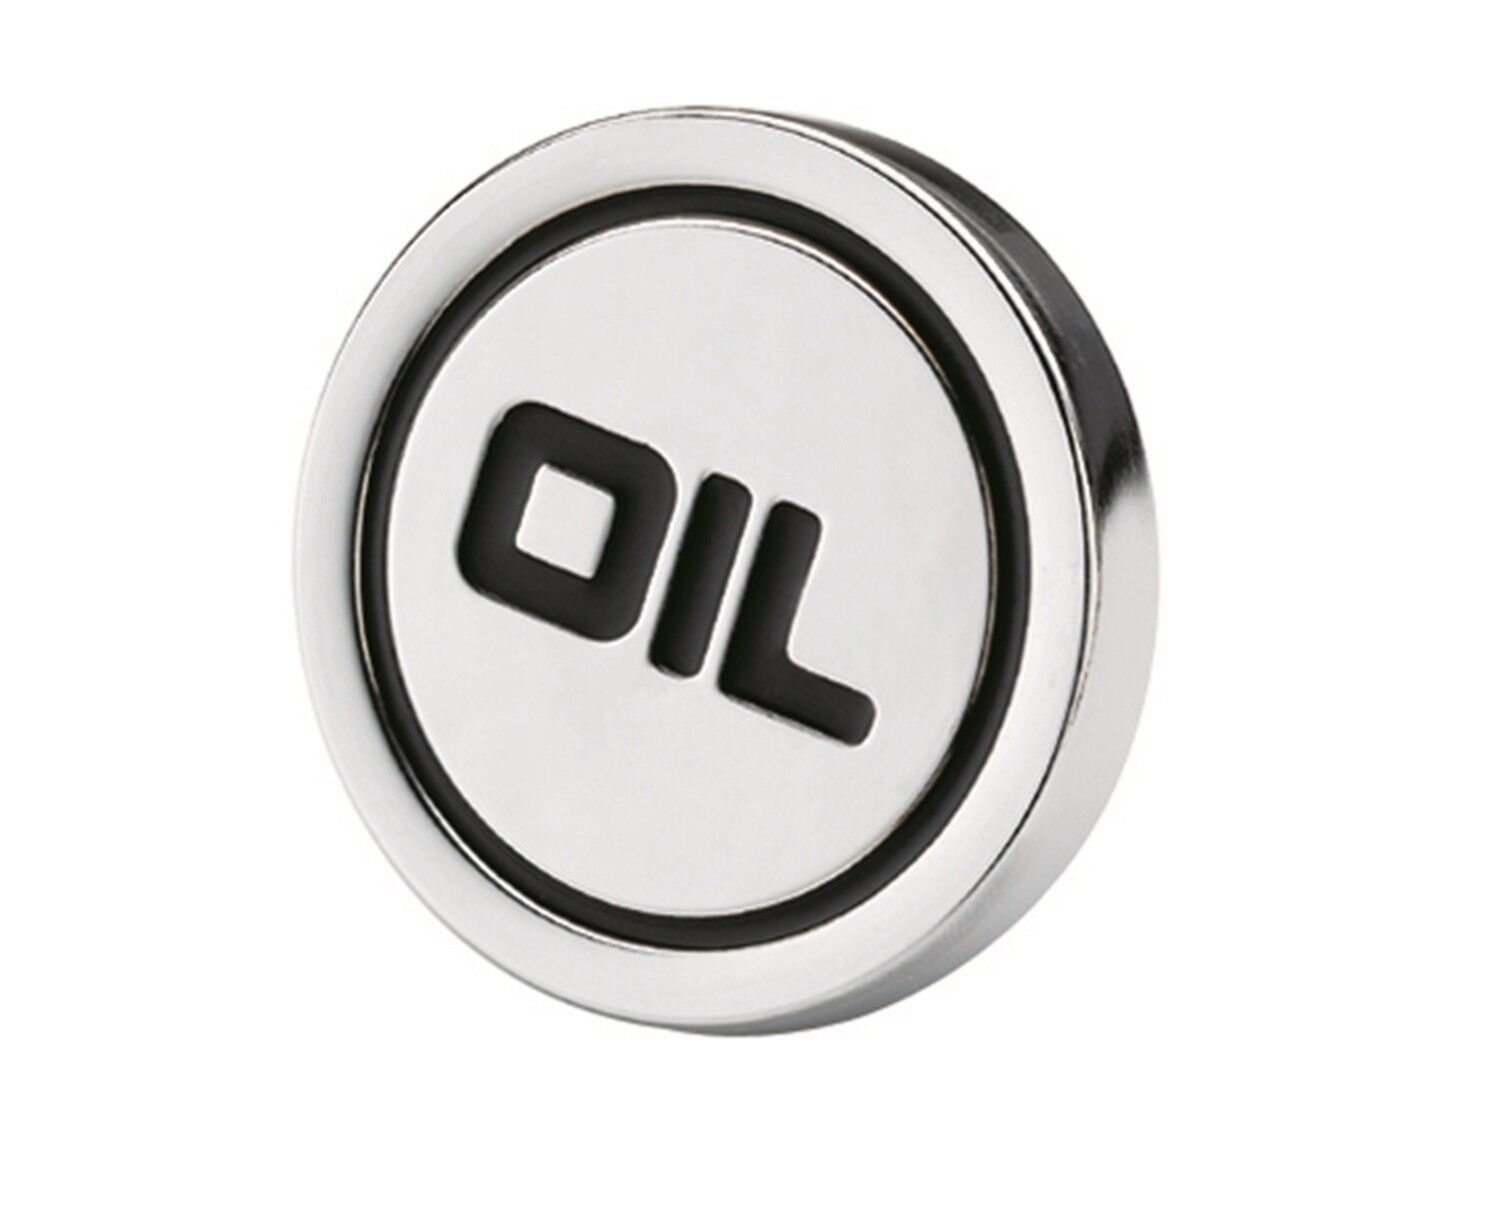 Engine Oil Filler Cap Gasket Mr 9815 Oakland Mall Easy-to-use